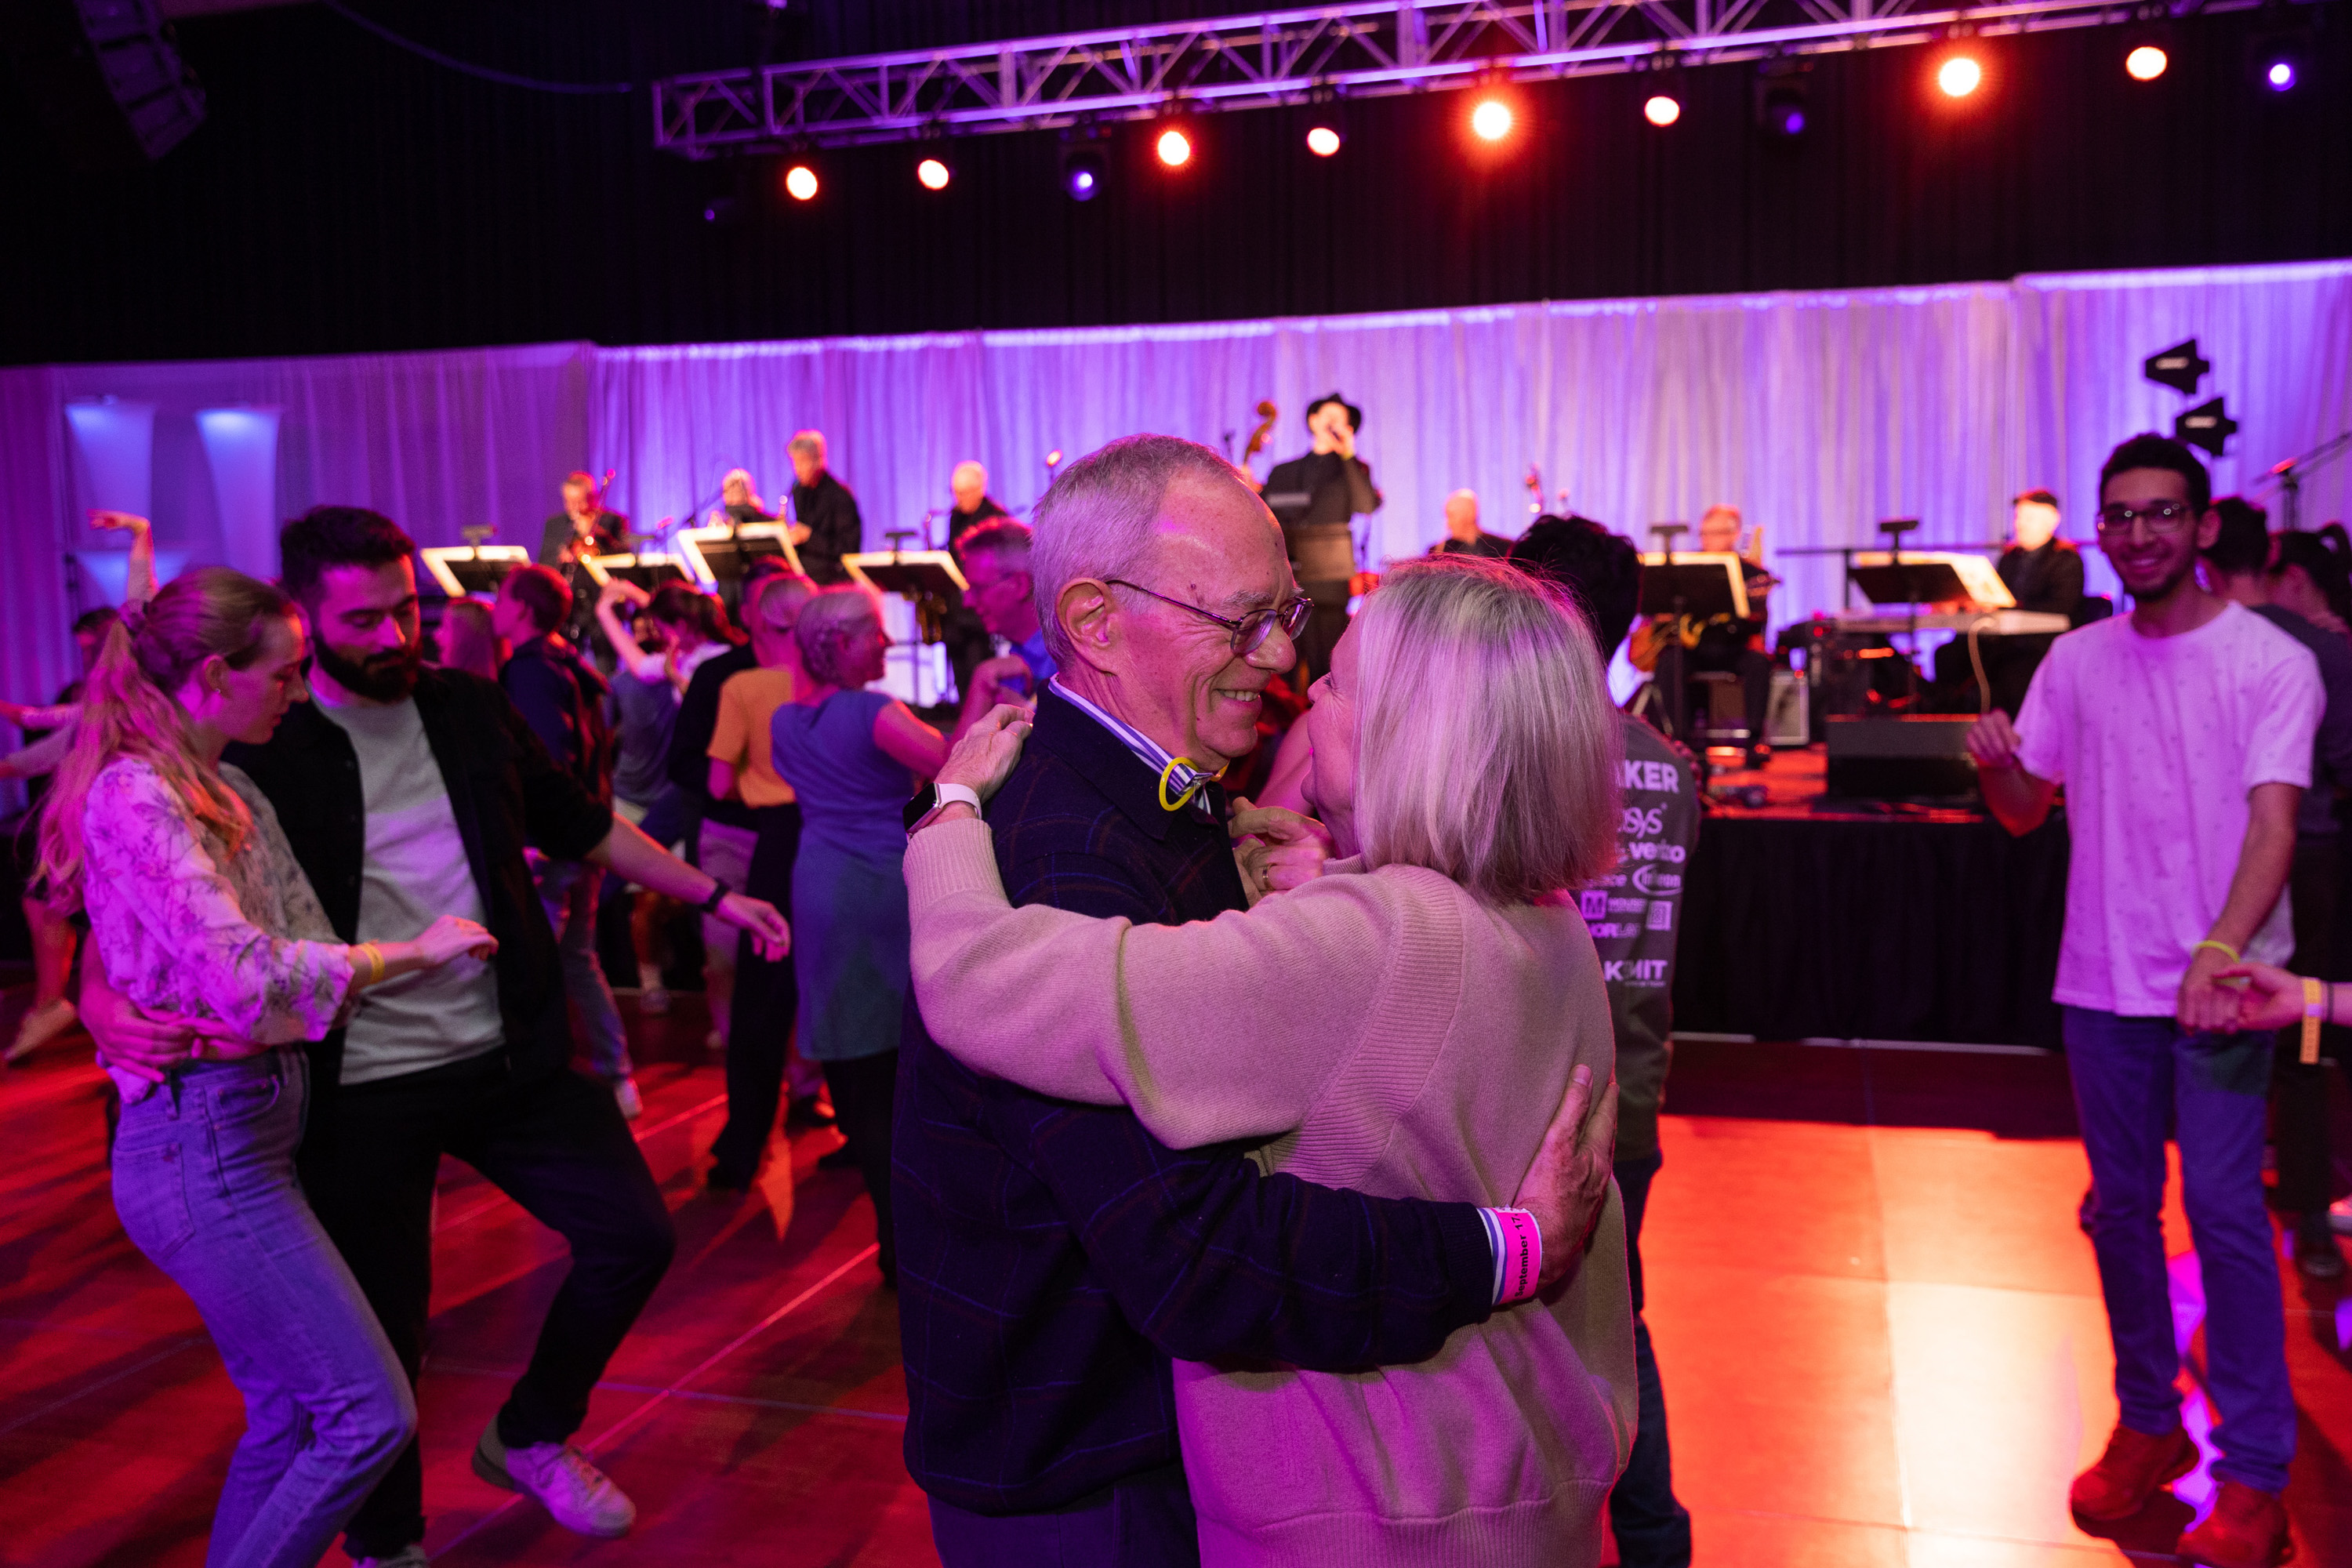 Reif and his wife Christine dance at an MIT evening event